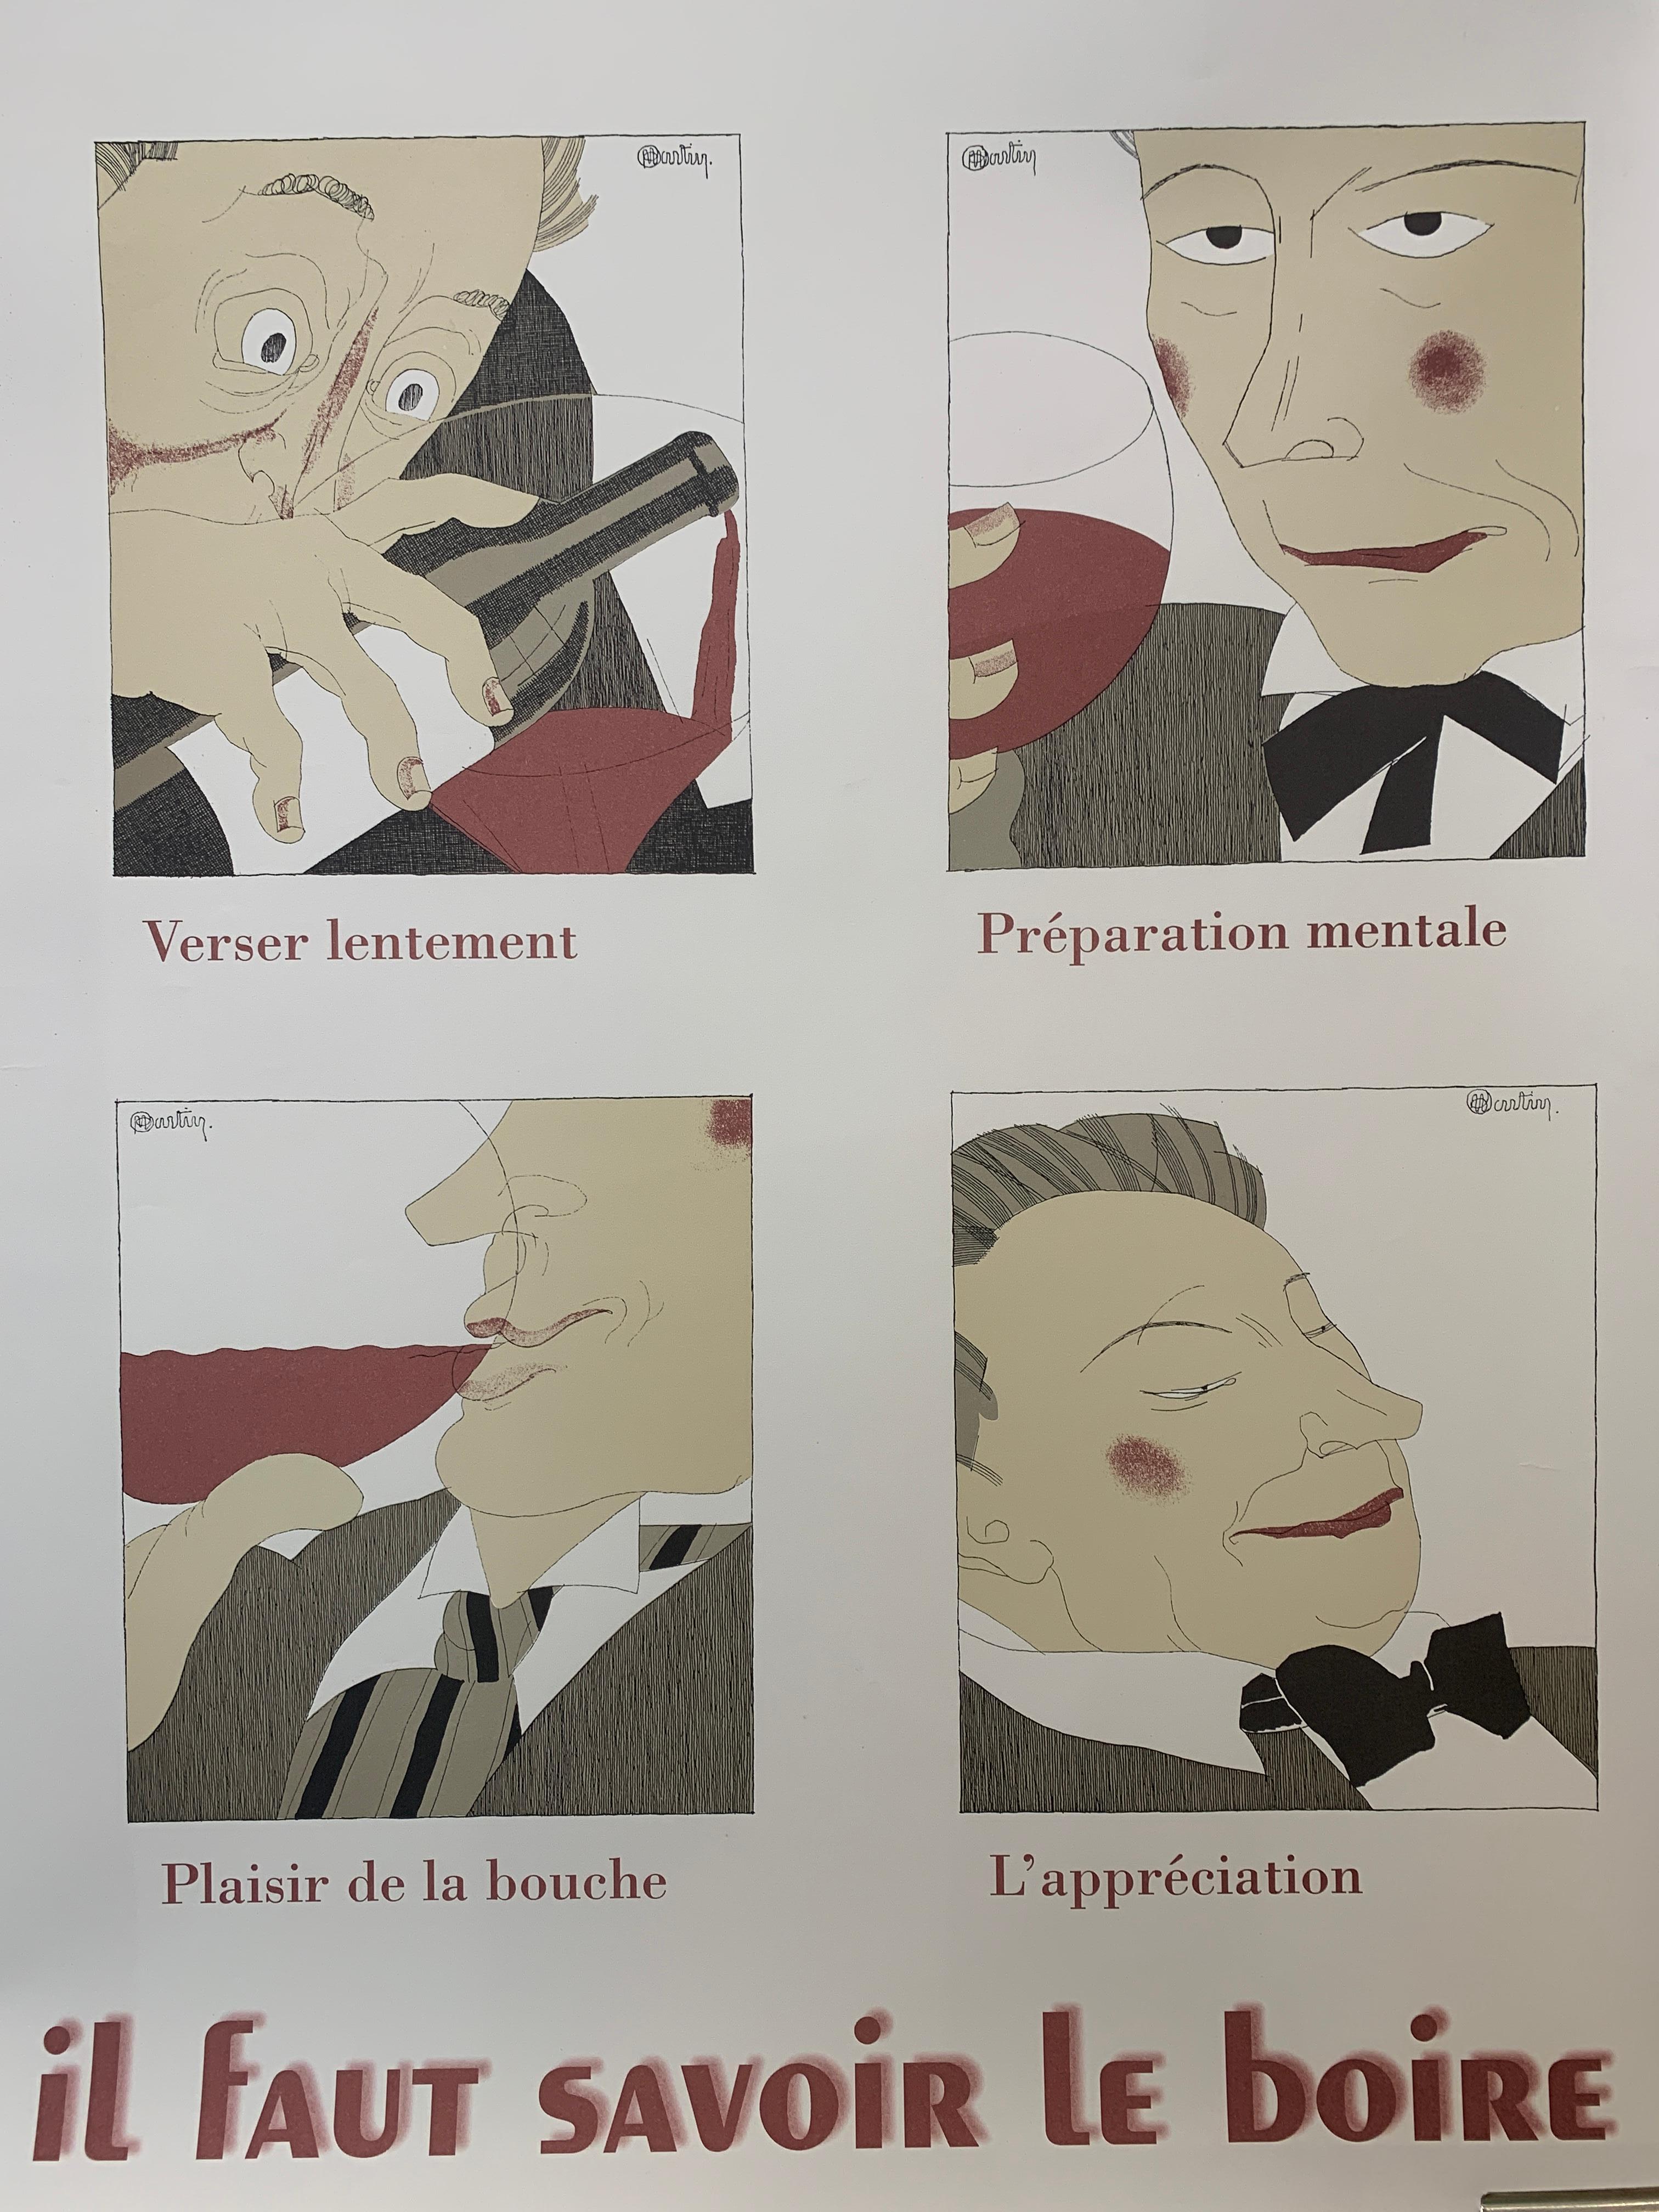 This poster was derived from a series of illustrations on the different stages of drinking wine. There is the uncorking, smelling the cork, pour slowly, mental preparation, the pleasure of the eyes, the pleasure of the nose, the pleasure of the